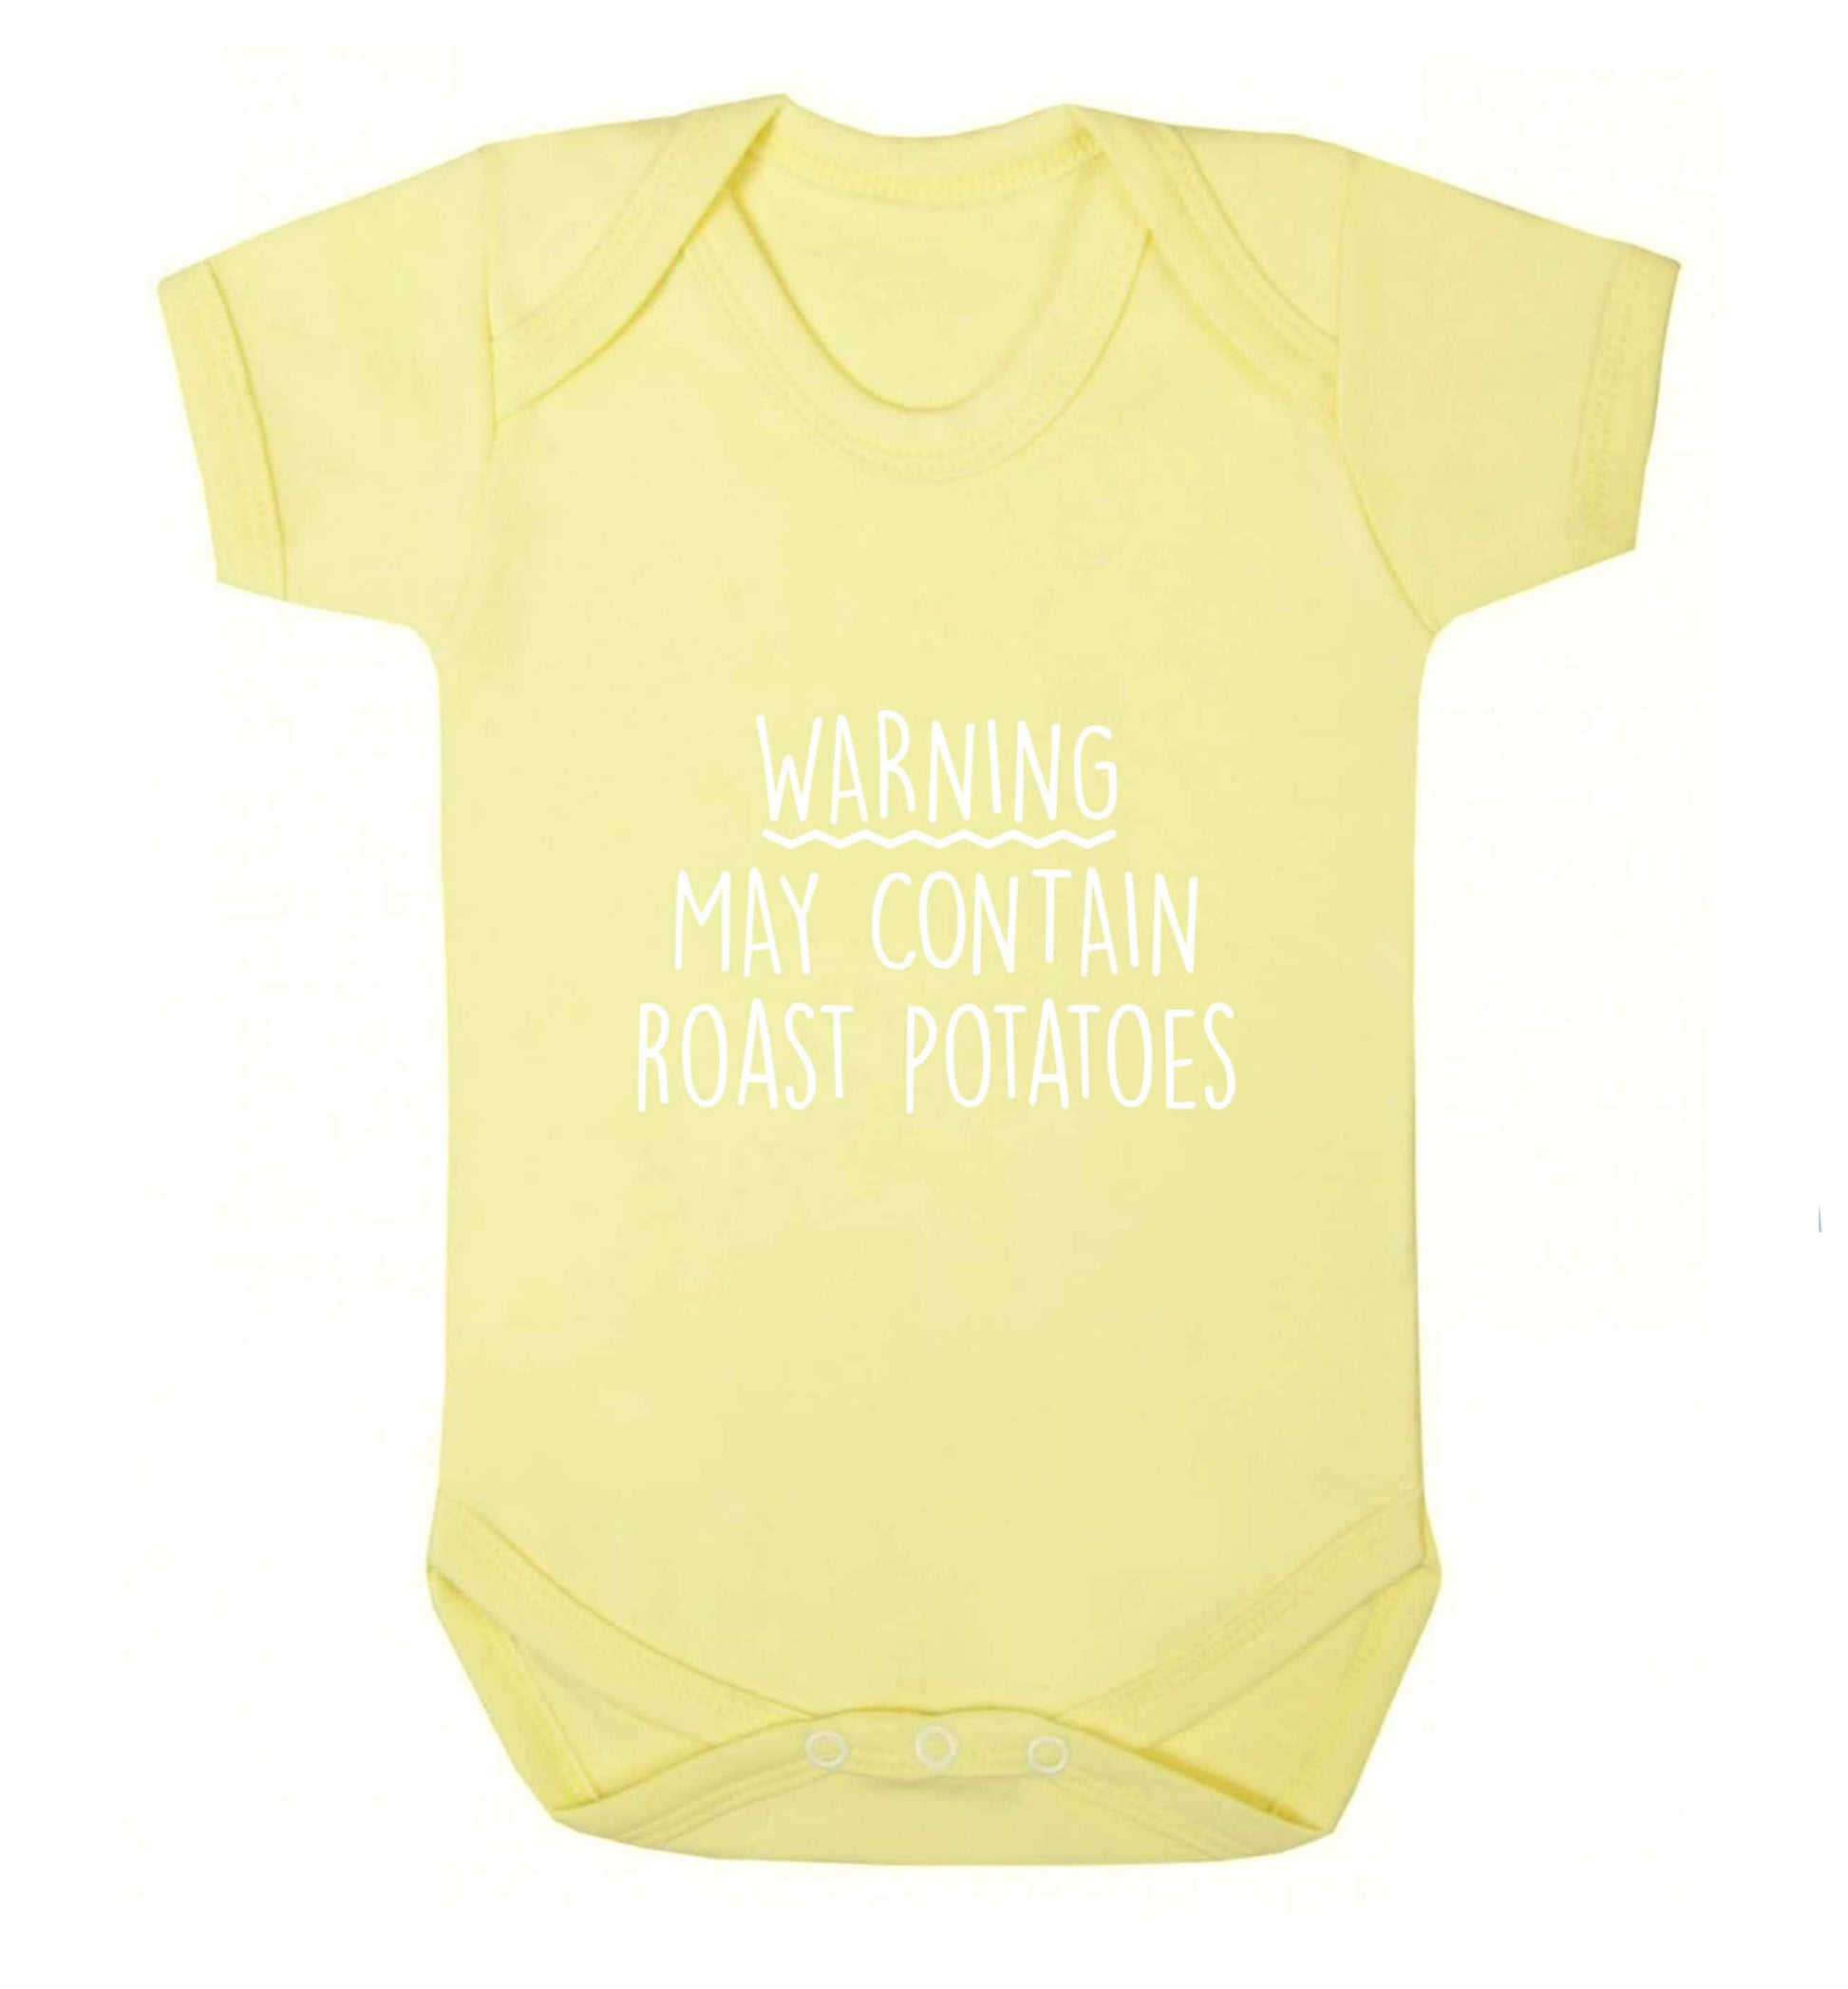 Warning may containg roast potatoes baby vest pale yellow 18-24 months